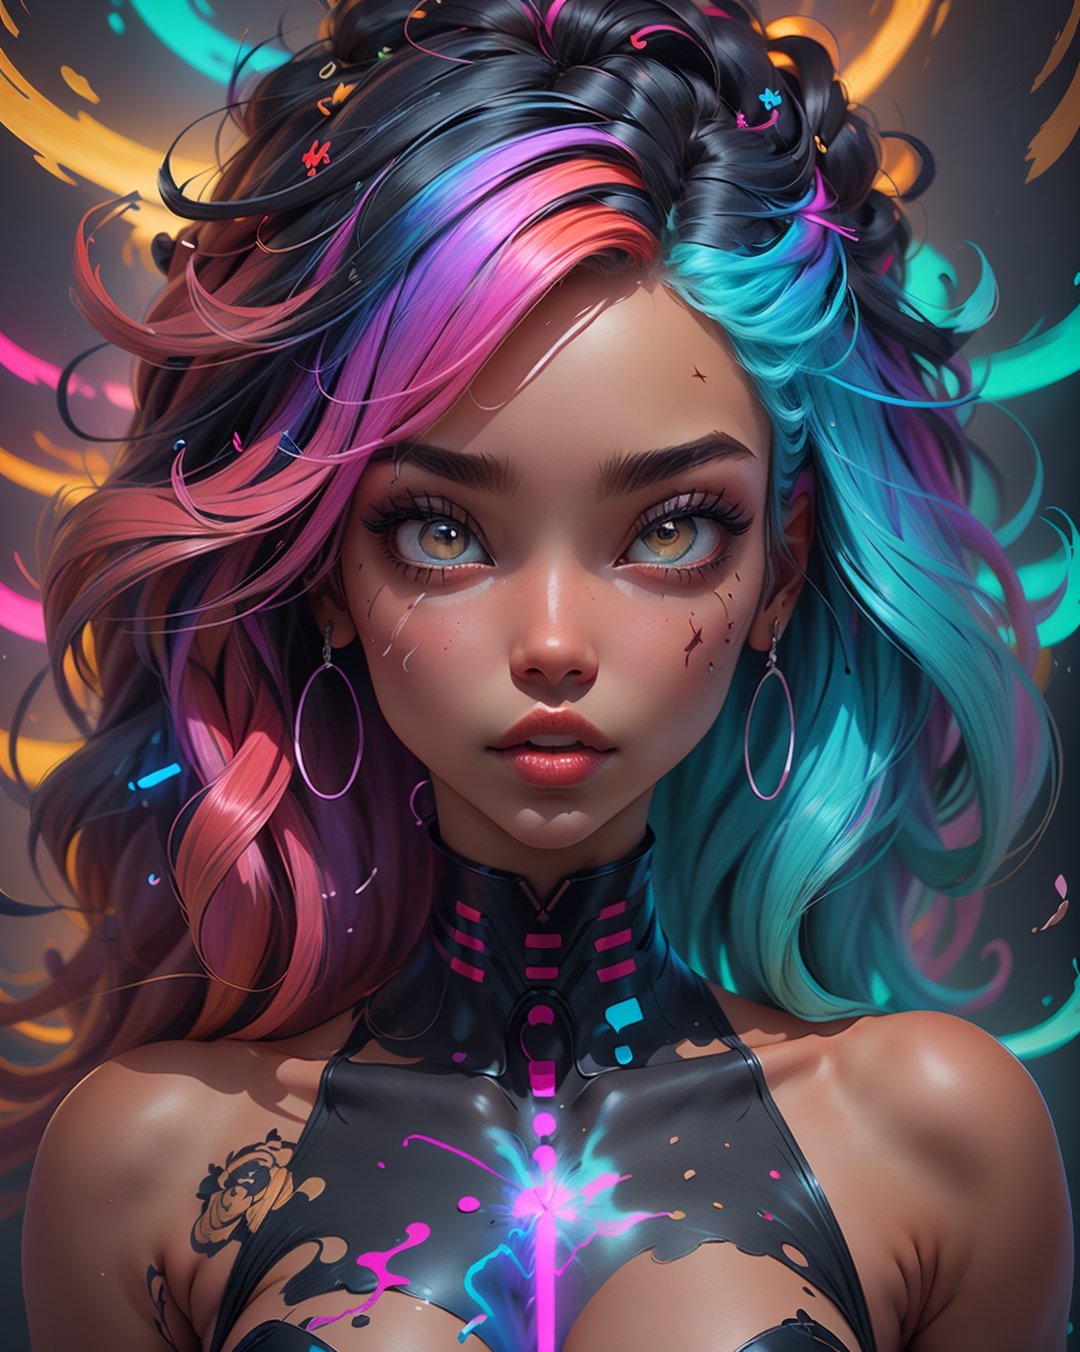 1 girl, full body, symmetrical face, perfect brown eyes, smoke, sparks, (female hair made of fine multicolored neon curls:1.5), (long thin hair made of multicolored neon strands flowing down the body), smoky skin, realism, (in a colorful candy world:1.2), in an absurd manga context, ultra high resolution, 8k, HDr, art, high detail, , art